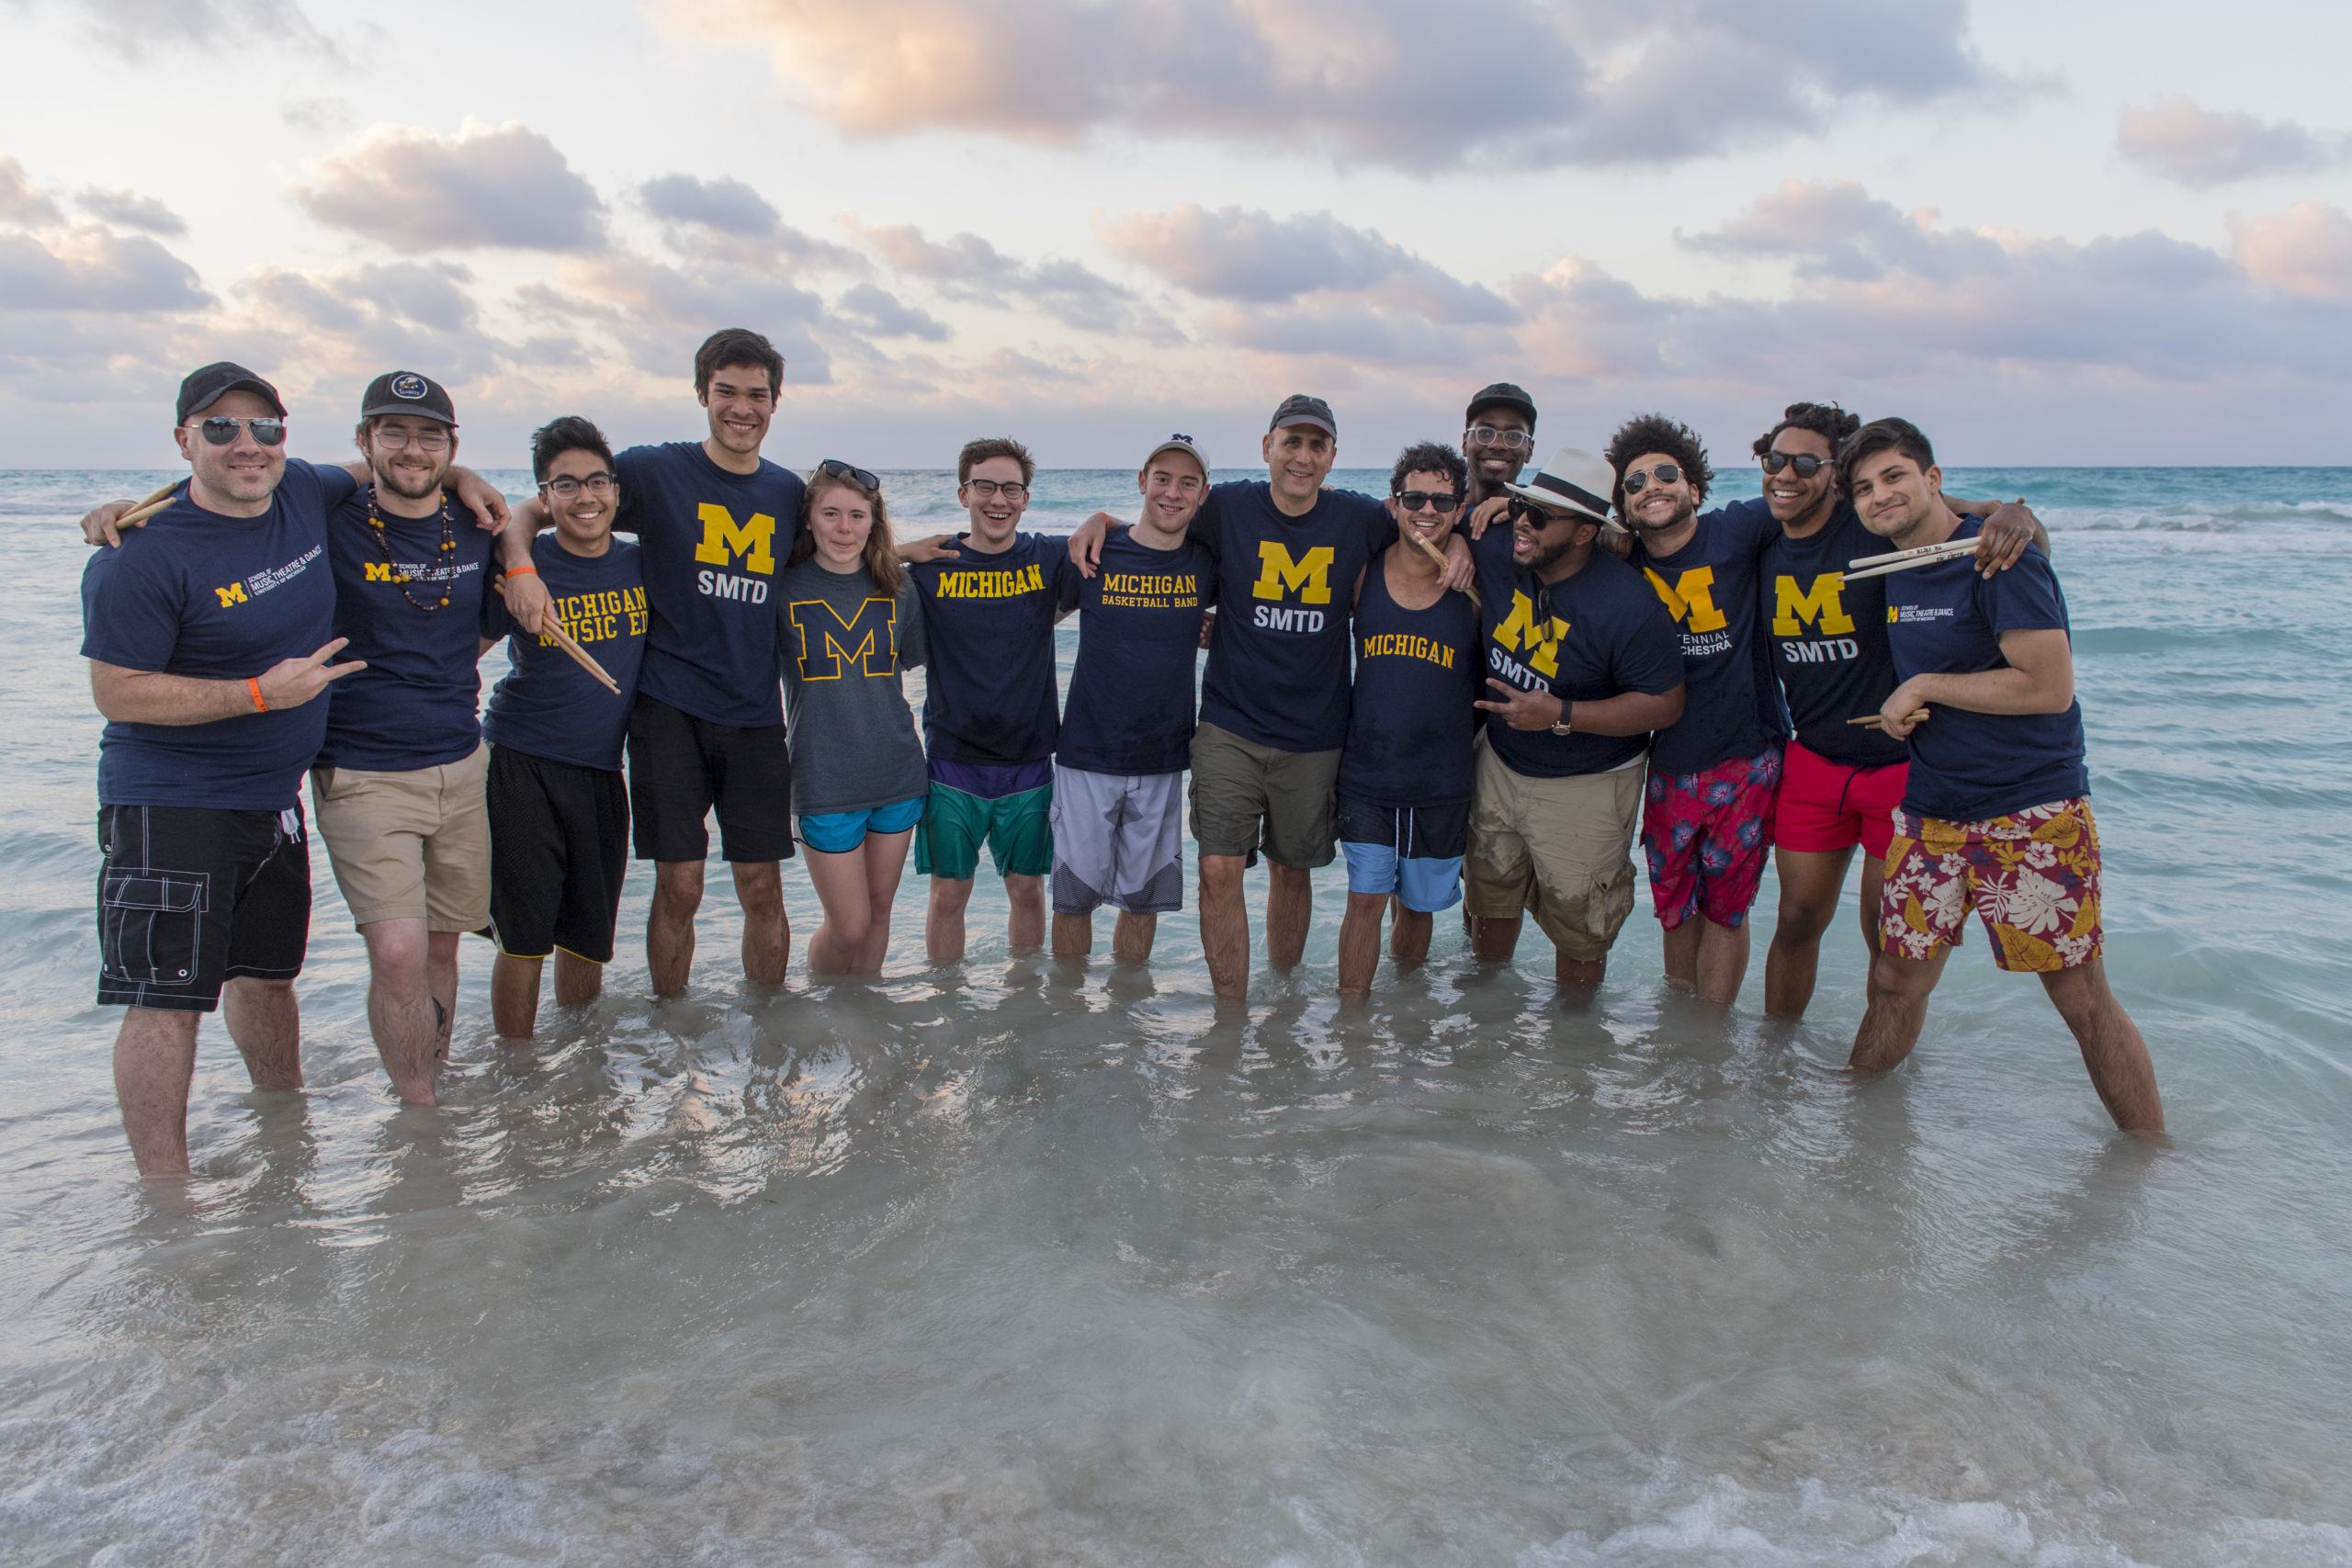 Fourteen SMTD students and faculty wearing various Michigan shirts stand ankle deep in water on a beach in Cuba.